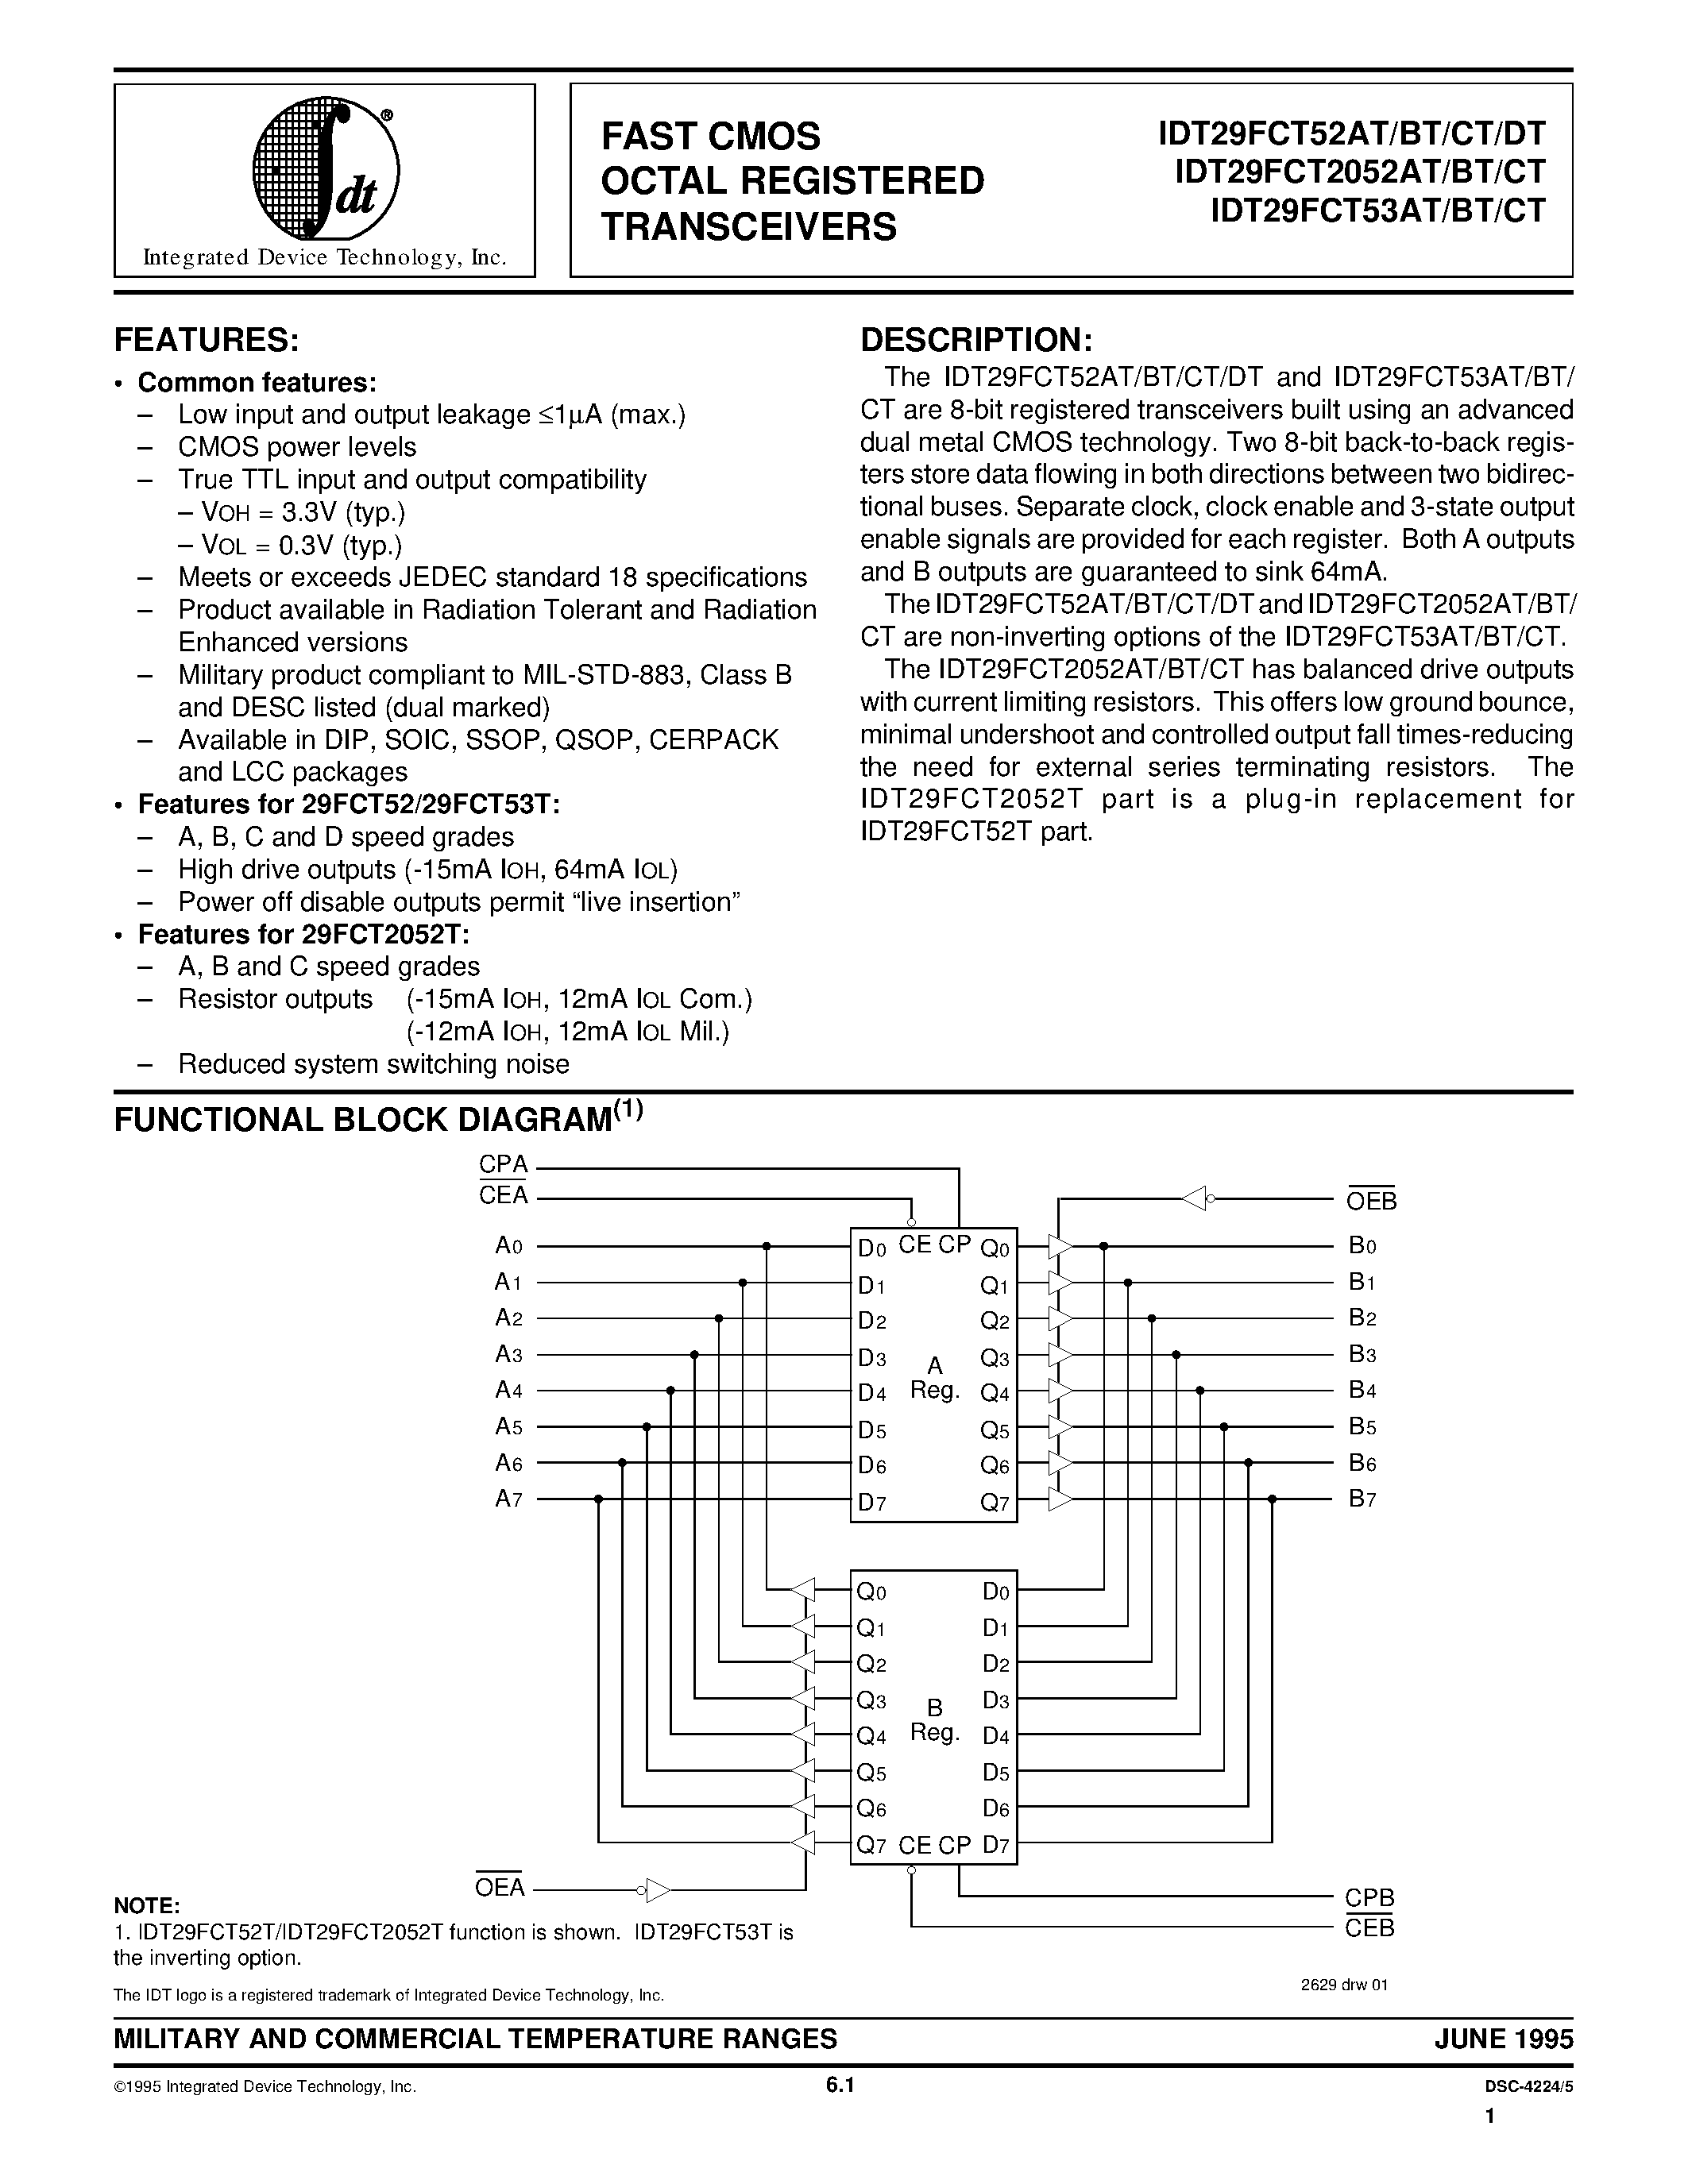 Datasheet 7429FCT53CTSO - FAST CMOS OCTAL REGISTERED TRANSCEIVERS page 1